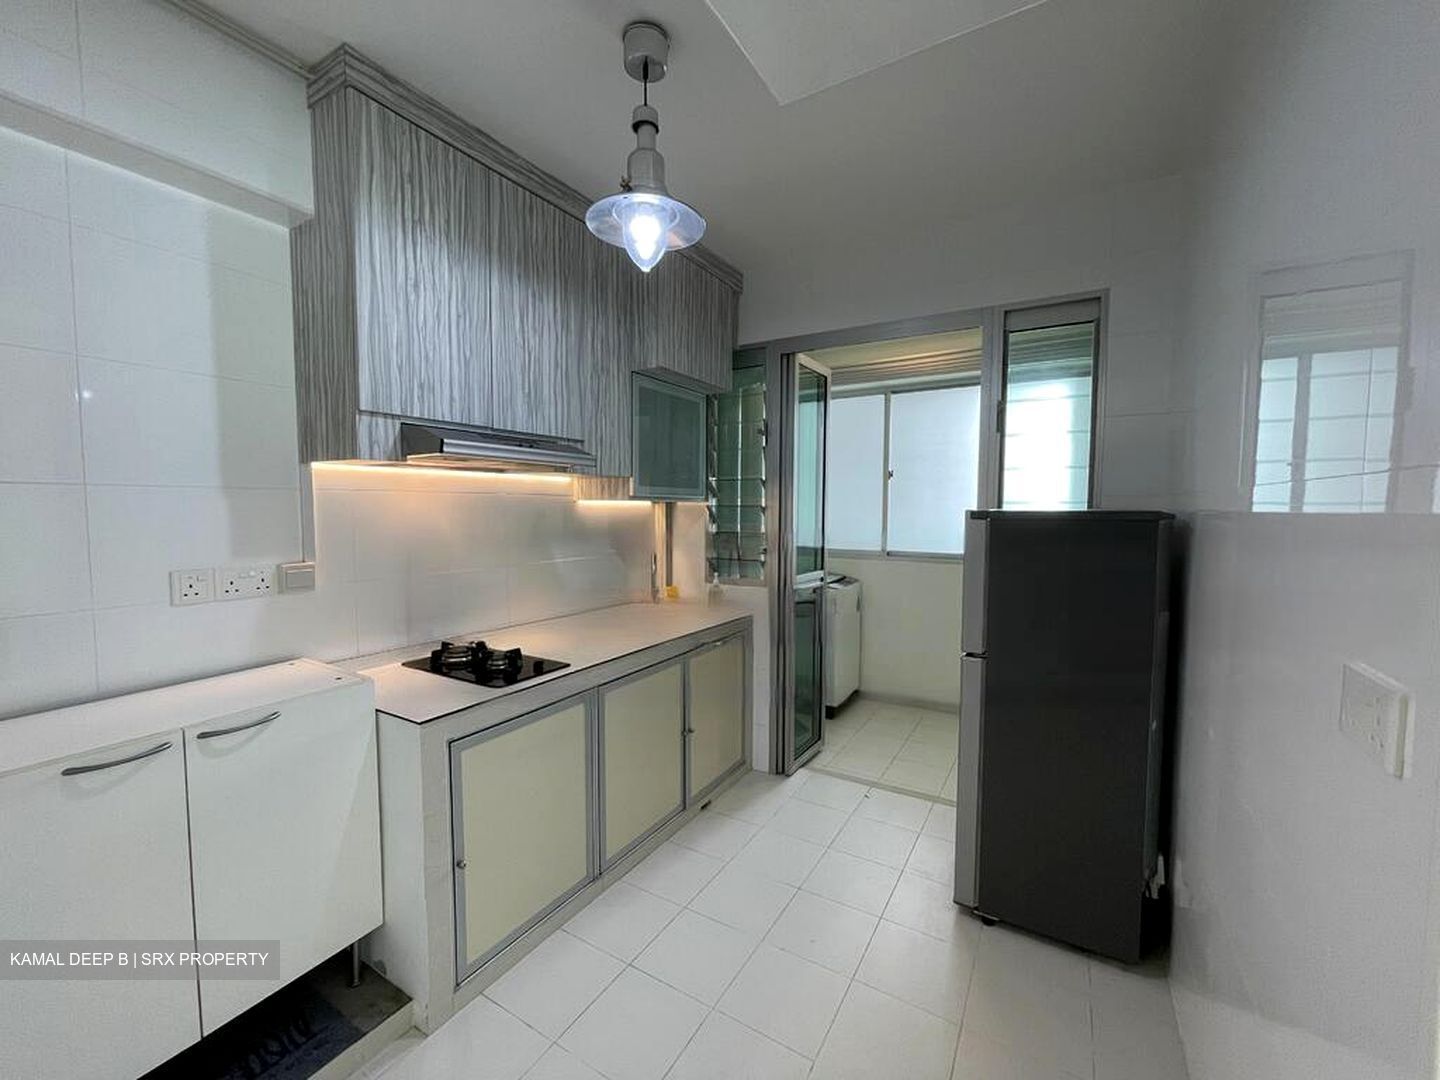 Blk 130A Toa Payoh Crest (Toa Payoh), HDB 3 Rooms #422261651